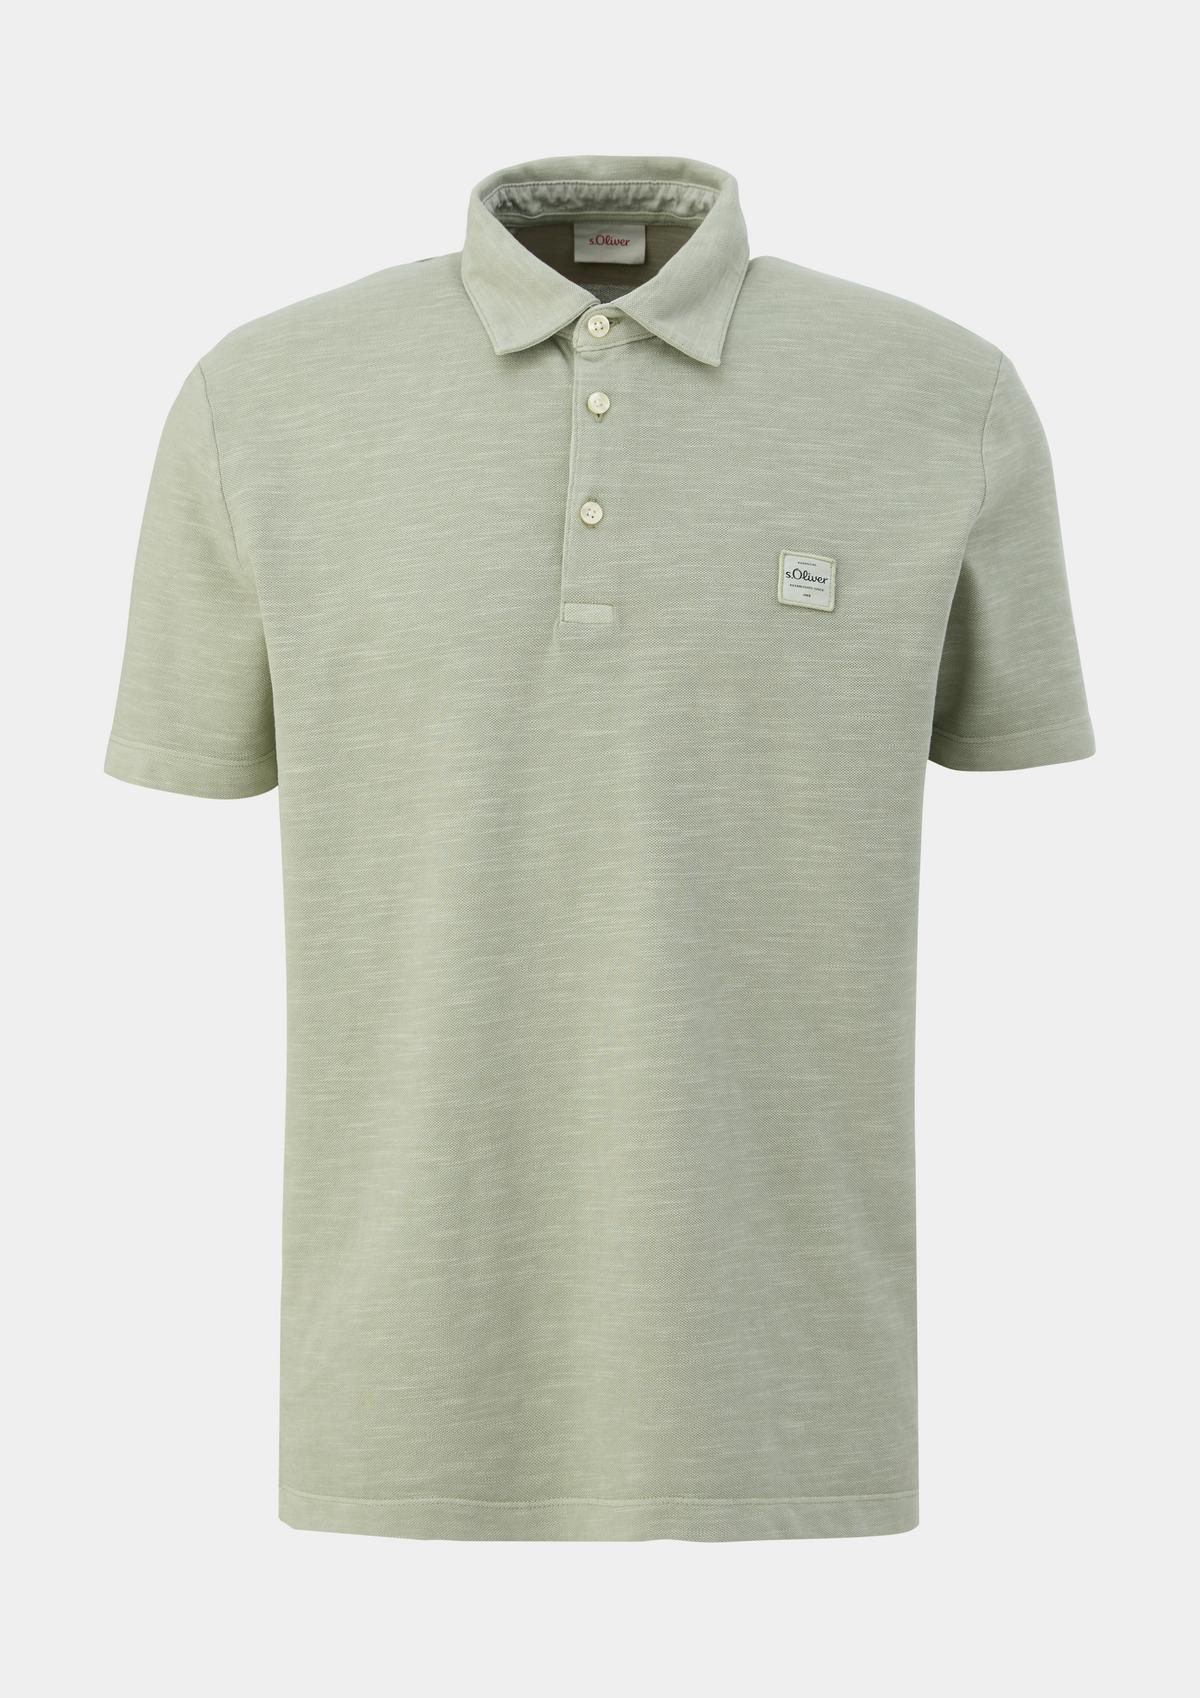 s.Oliver Poloshirt mit Label-Patch